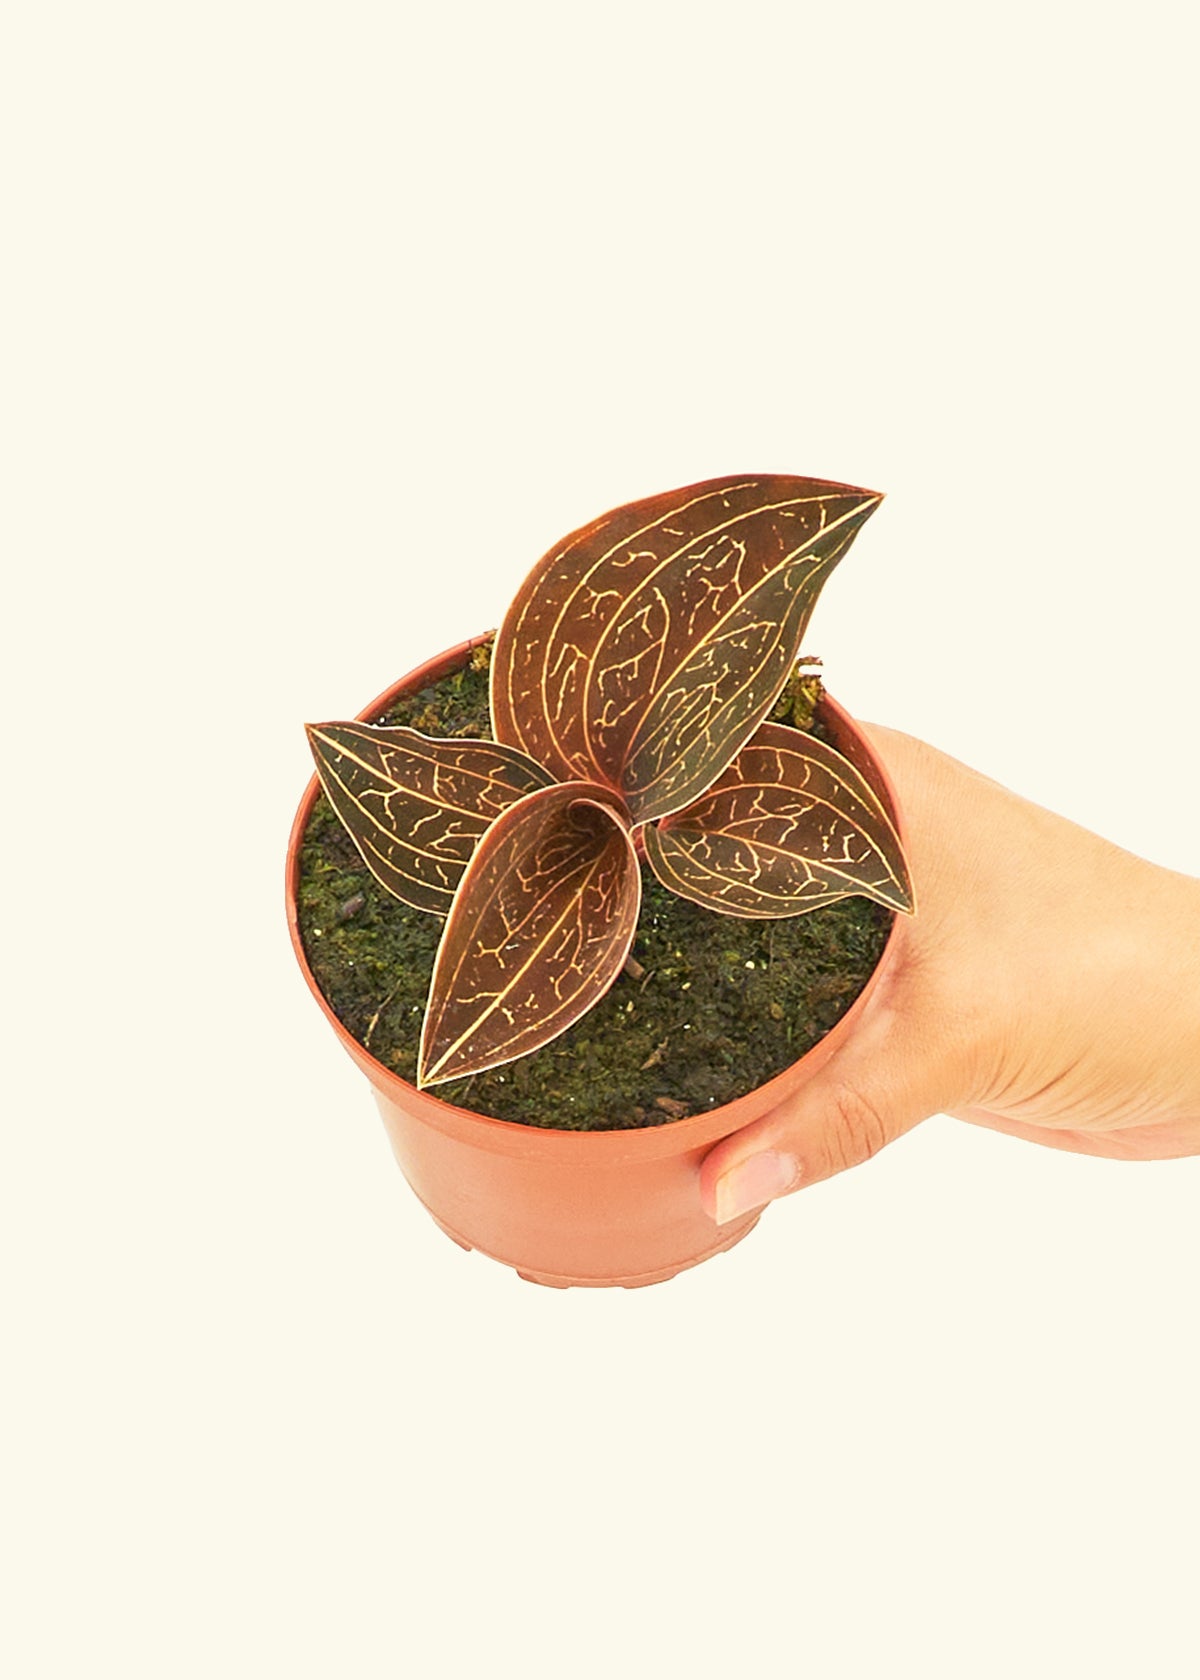 A 4" jewel orchid in a grow pot.